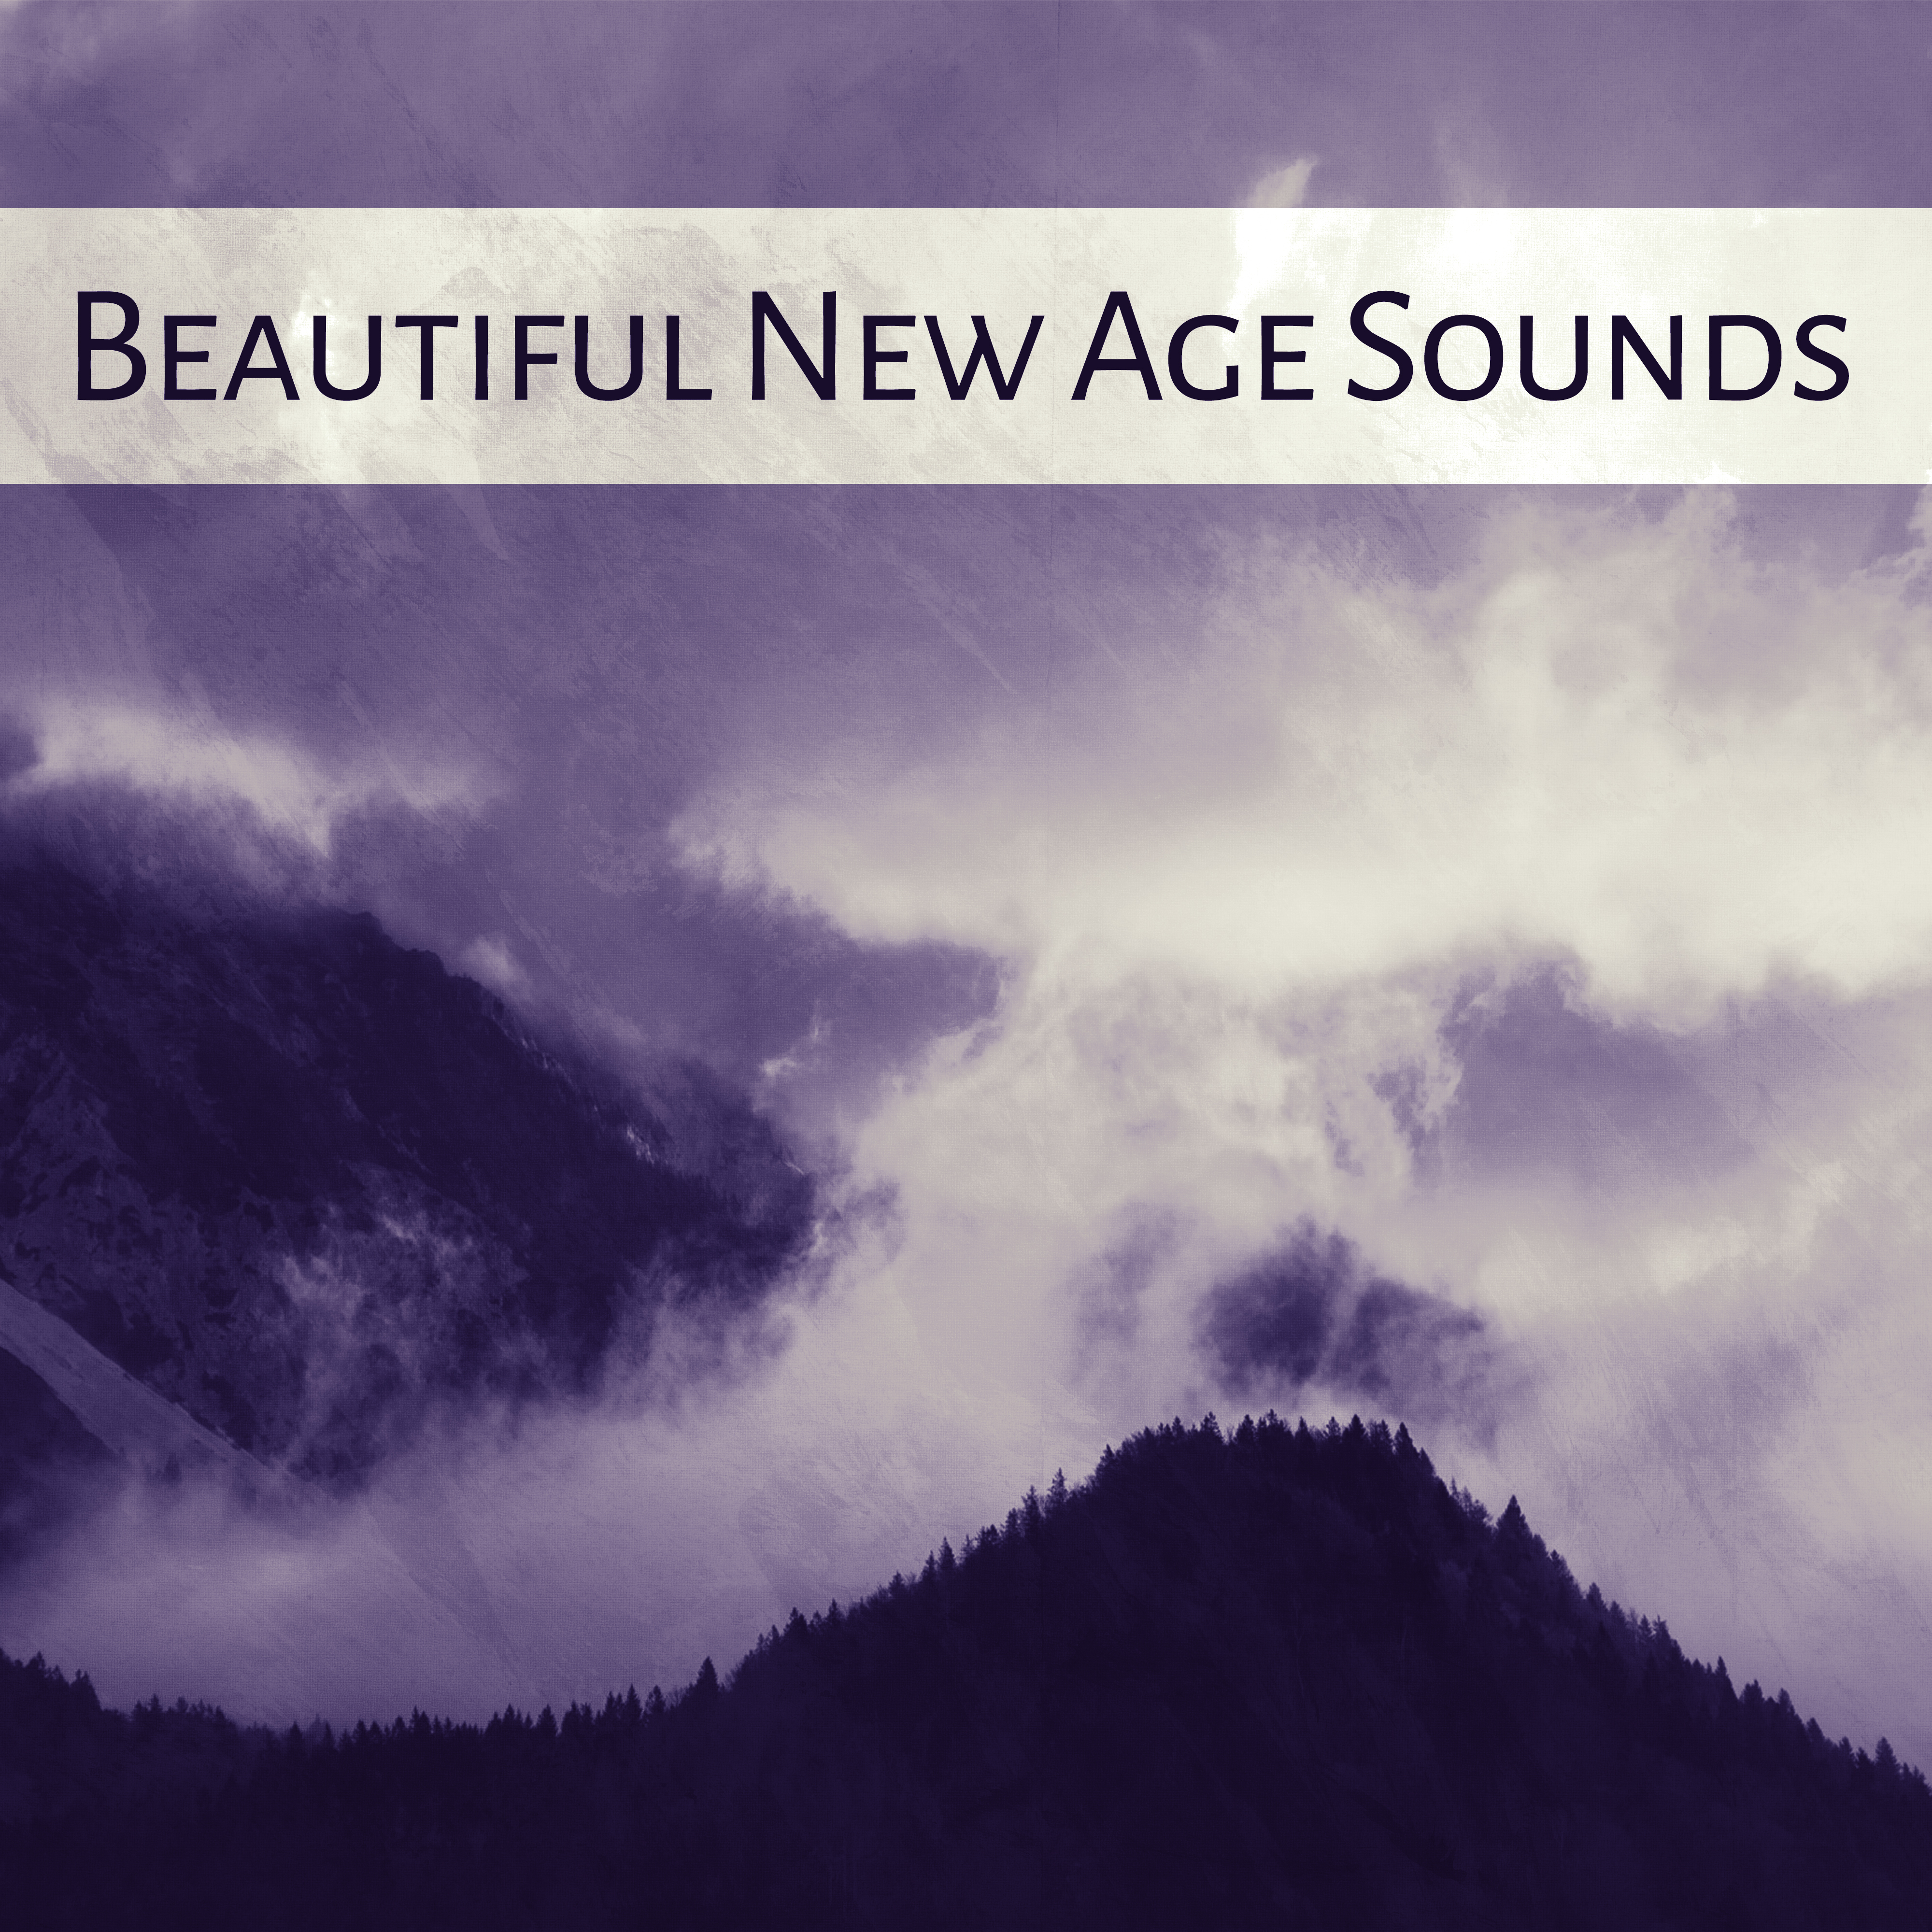 Beautiful New Age Sounds – Relaxing Sounds, Meditation Calmness, Healing Nature Waves, Soothing Music